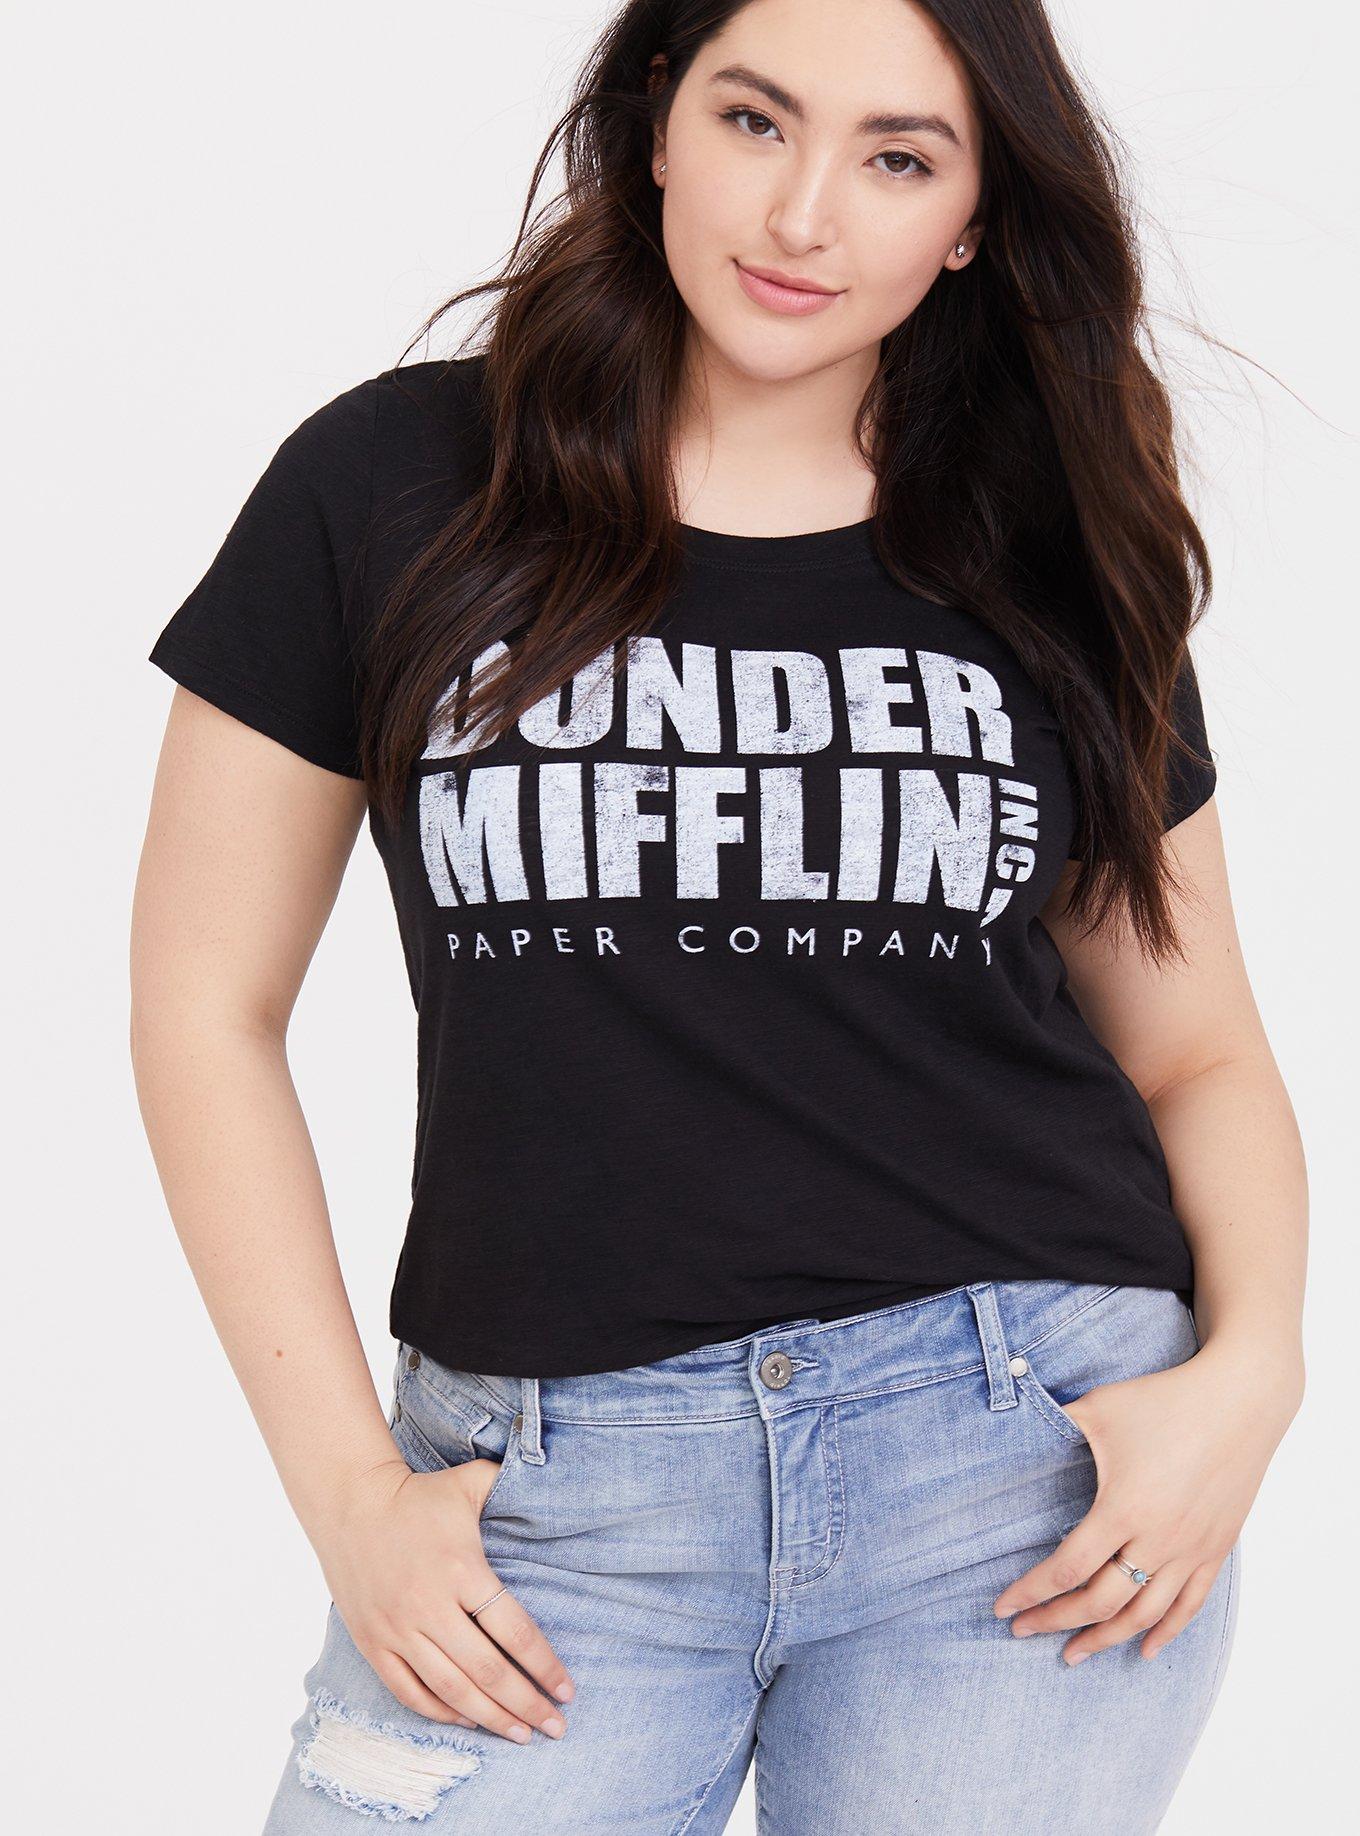 Office US Dunder Mifflin Paper Company Inc T-Shirt - My Icon Clothing